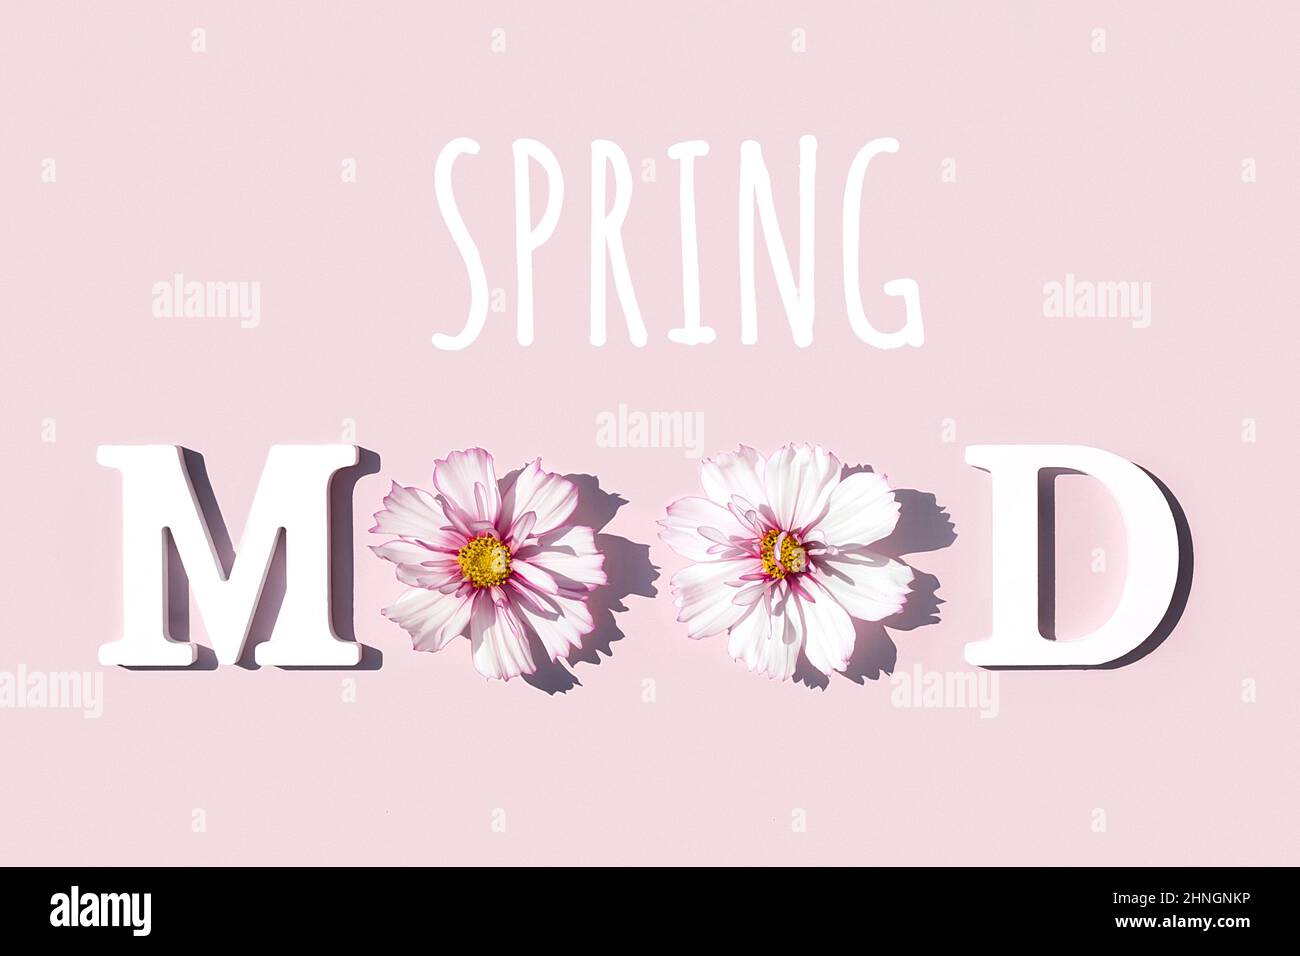 Spring Mood. Motivational quote from white letters and beauty natural flowers on pink background. Creative concept spring time. Stock Photo